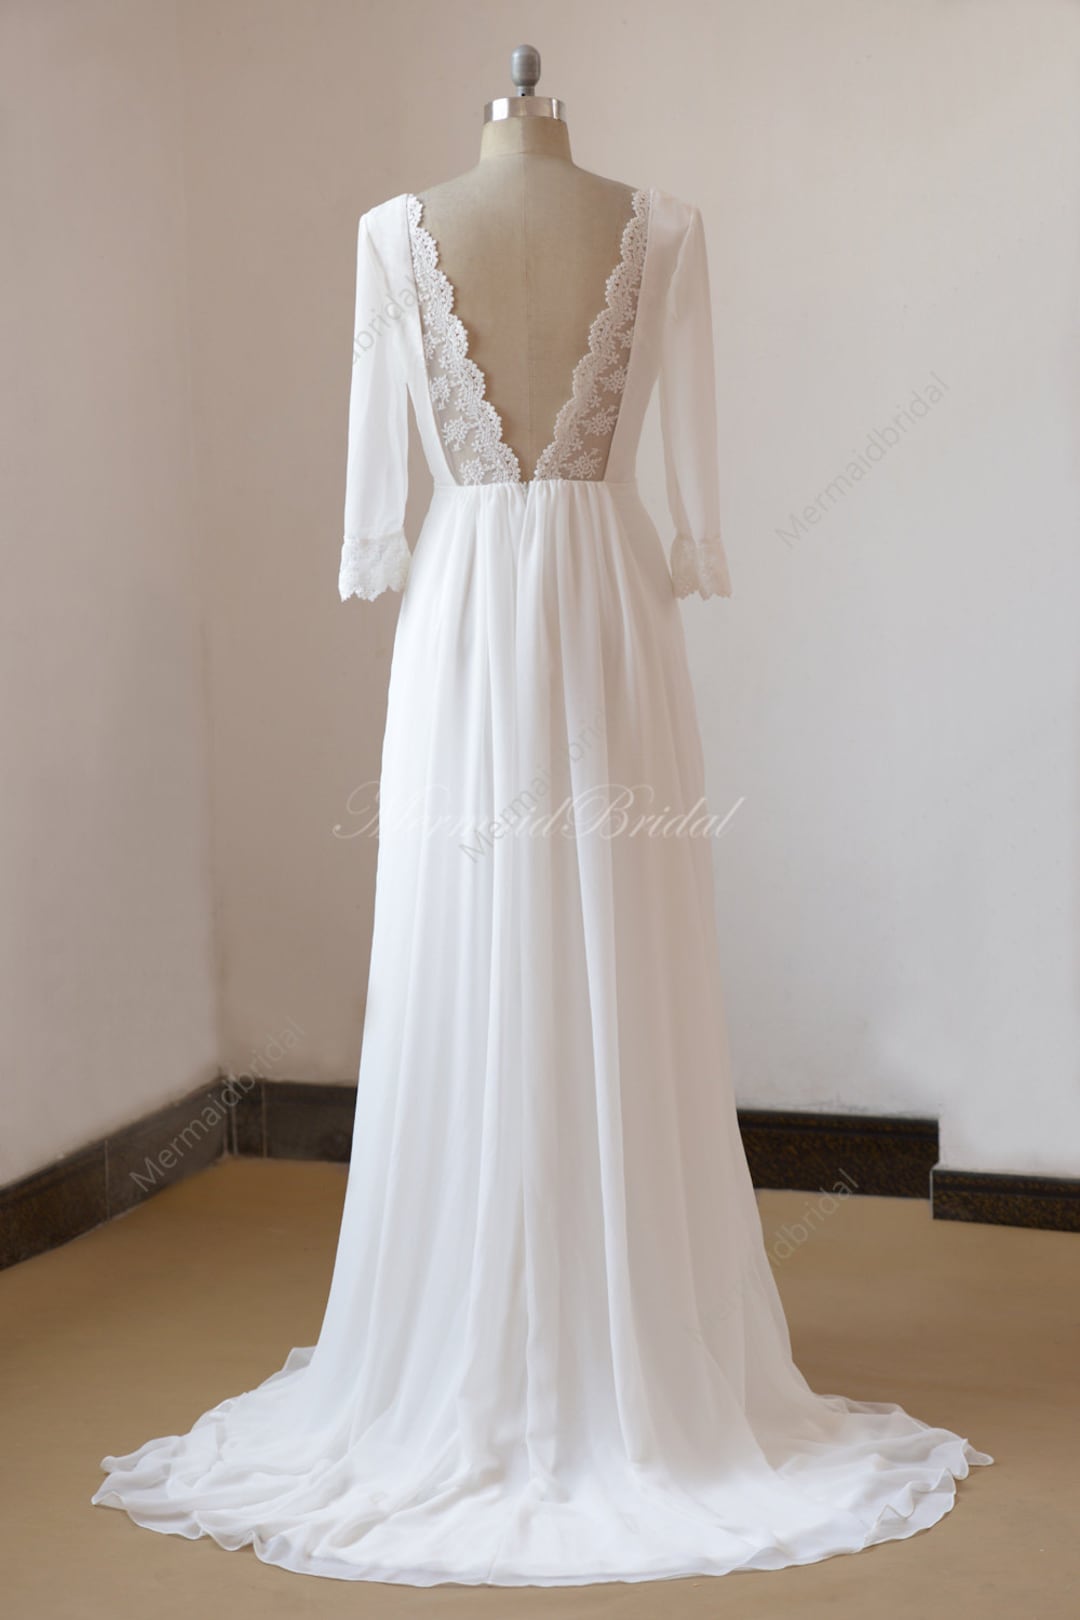 Lace Open Back Ivory a Line Chiffon Wedding Dress With Mid Sleeves - Etsy